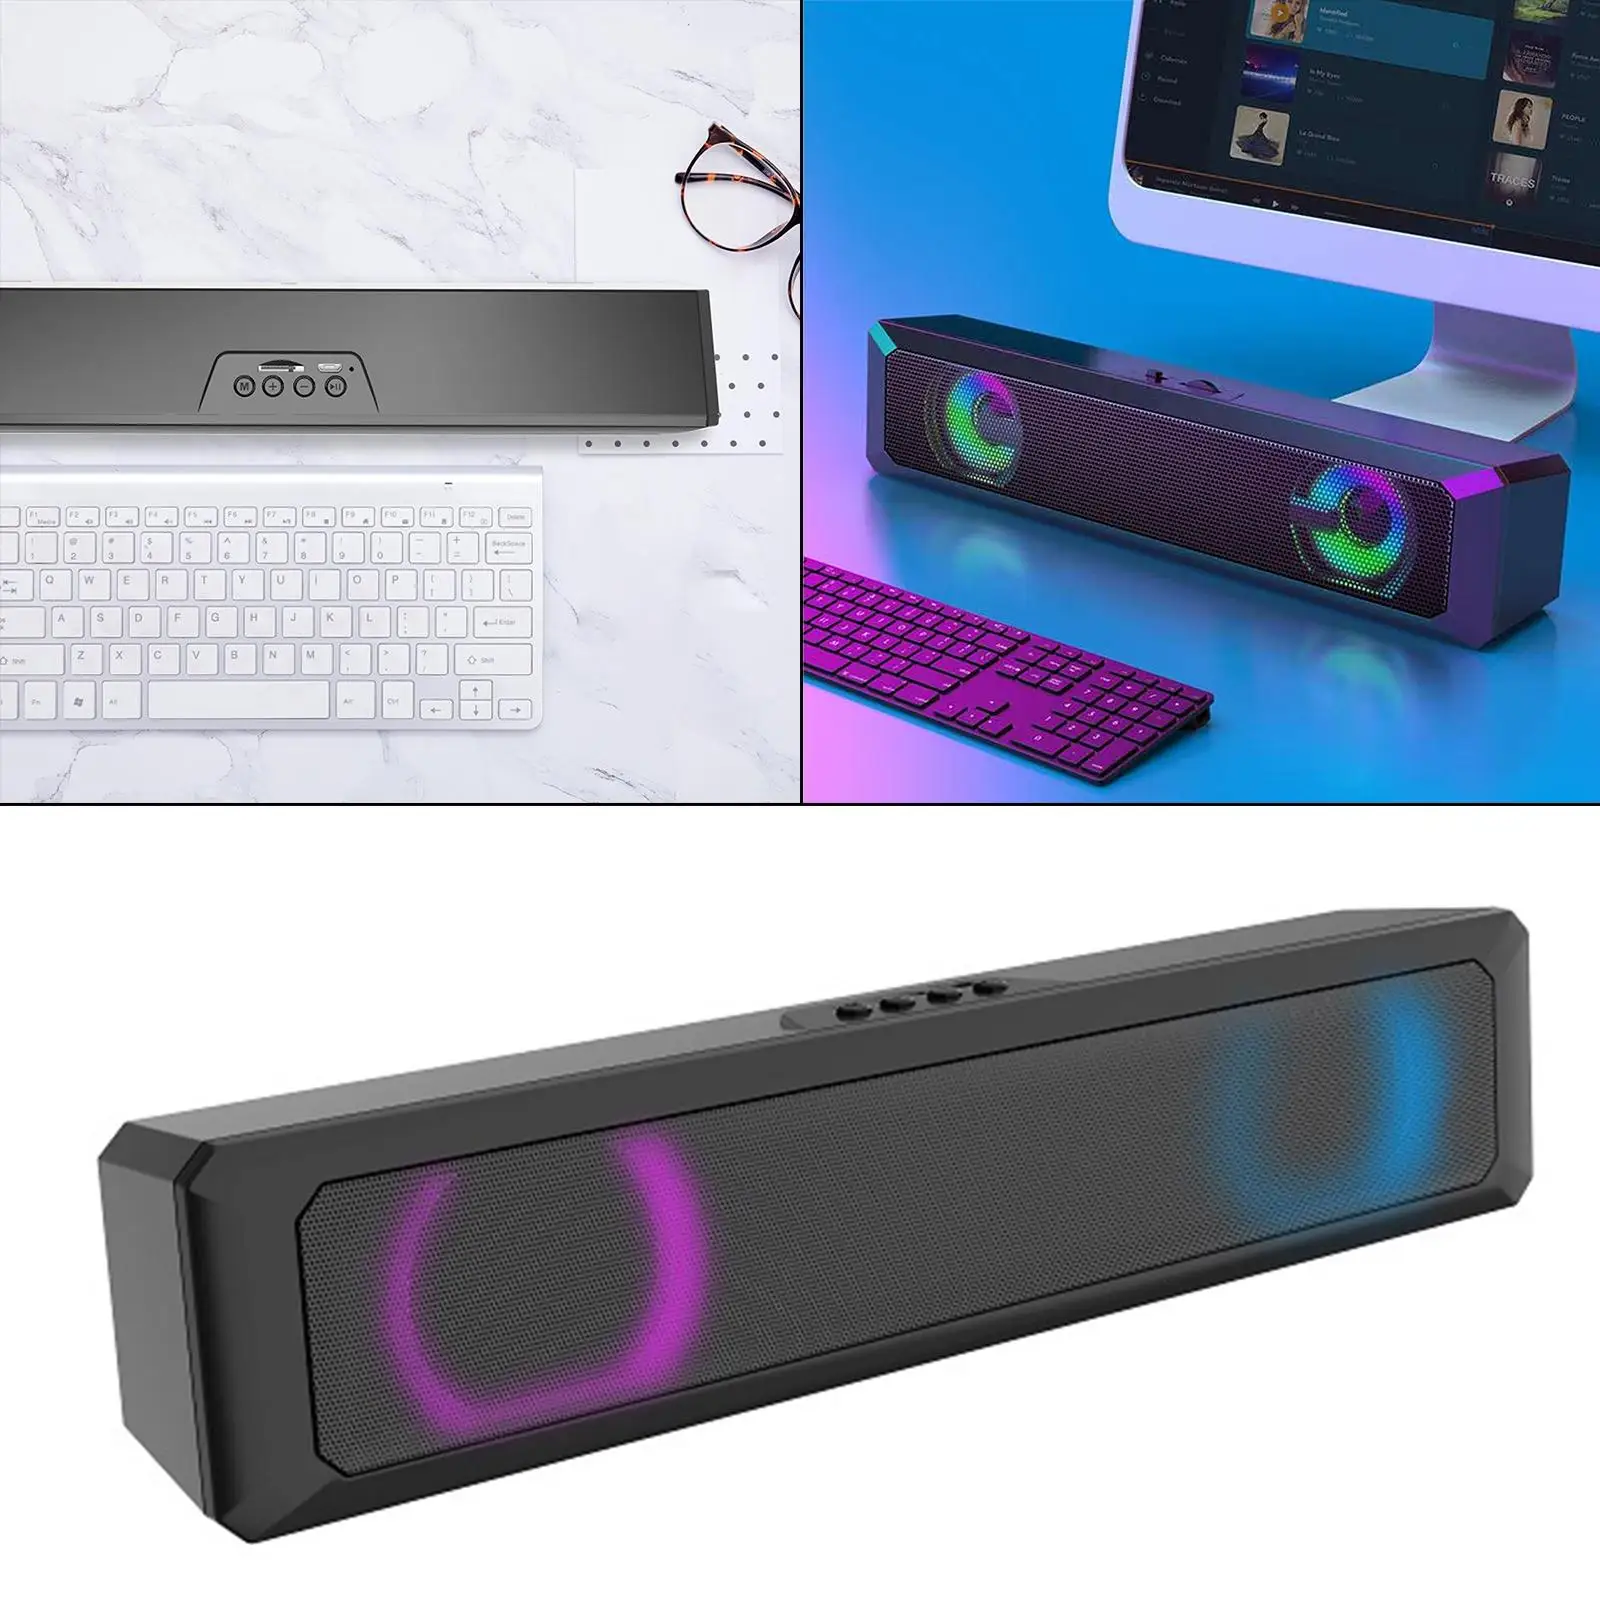 A4 Computer Soundbar Colorful RGB Light Built in Battery Stereo Surround Music Player Sound Bar for Desktop Laptop TV PC Gaming